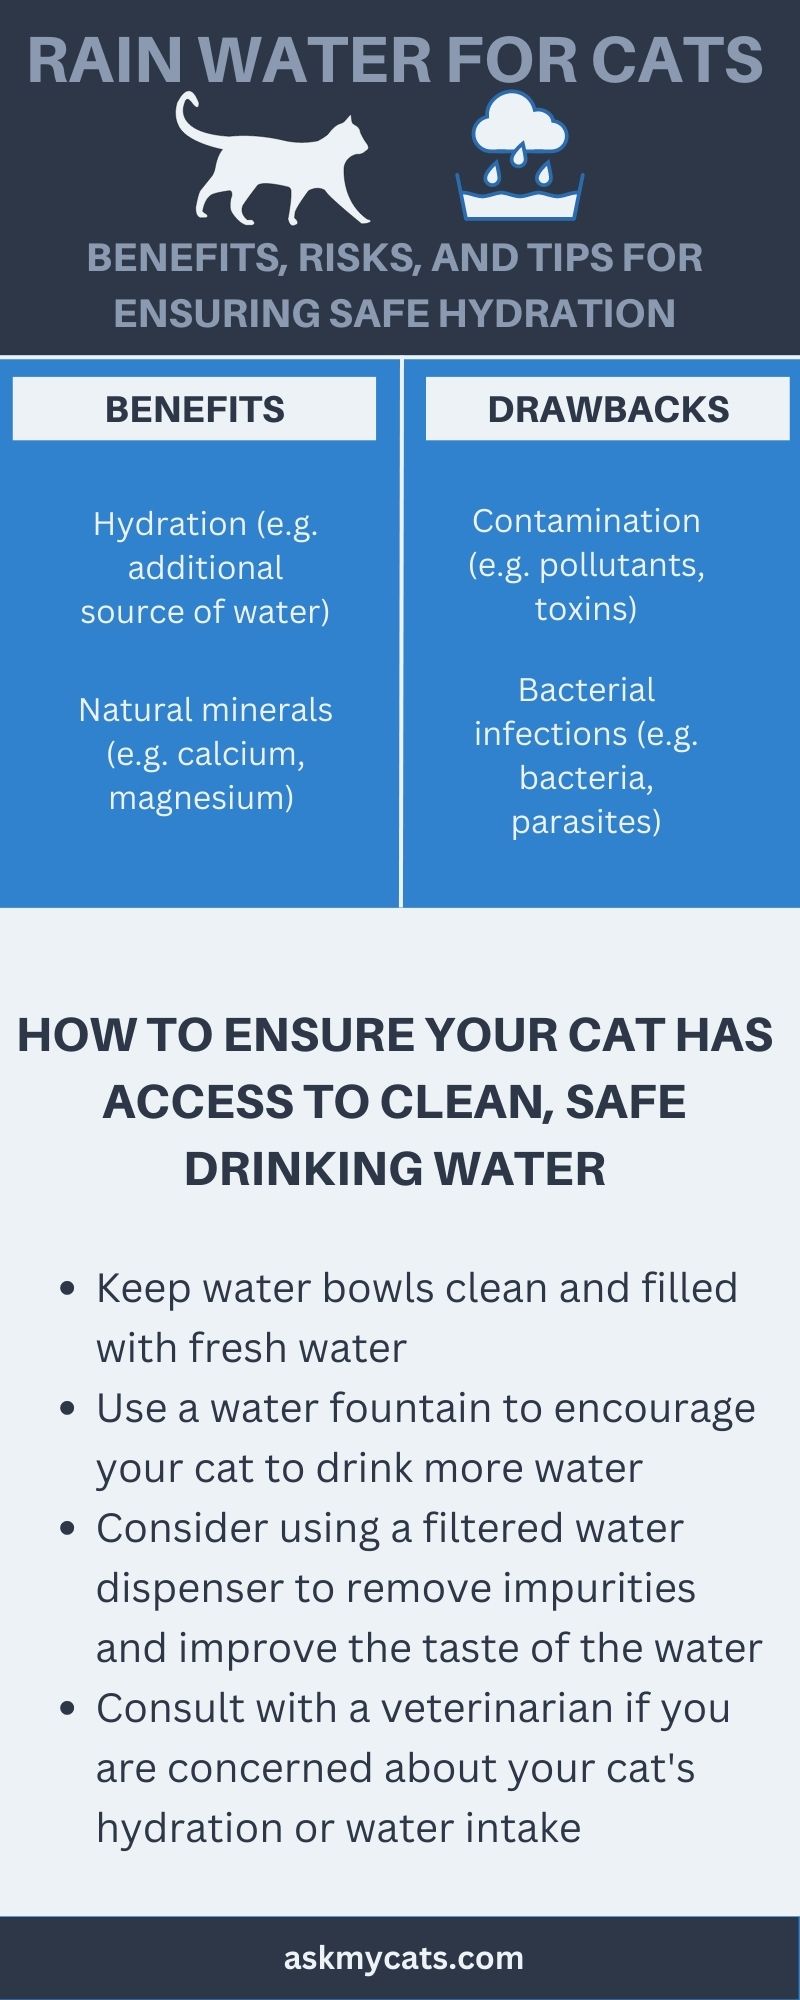 Rain Water for Cats (Infographic)